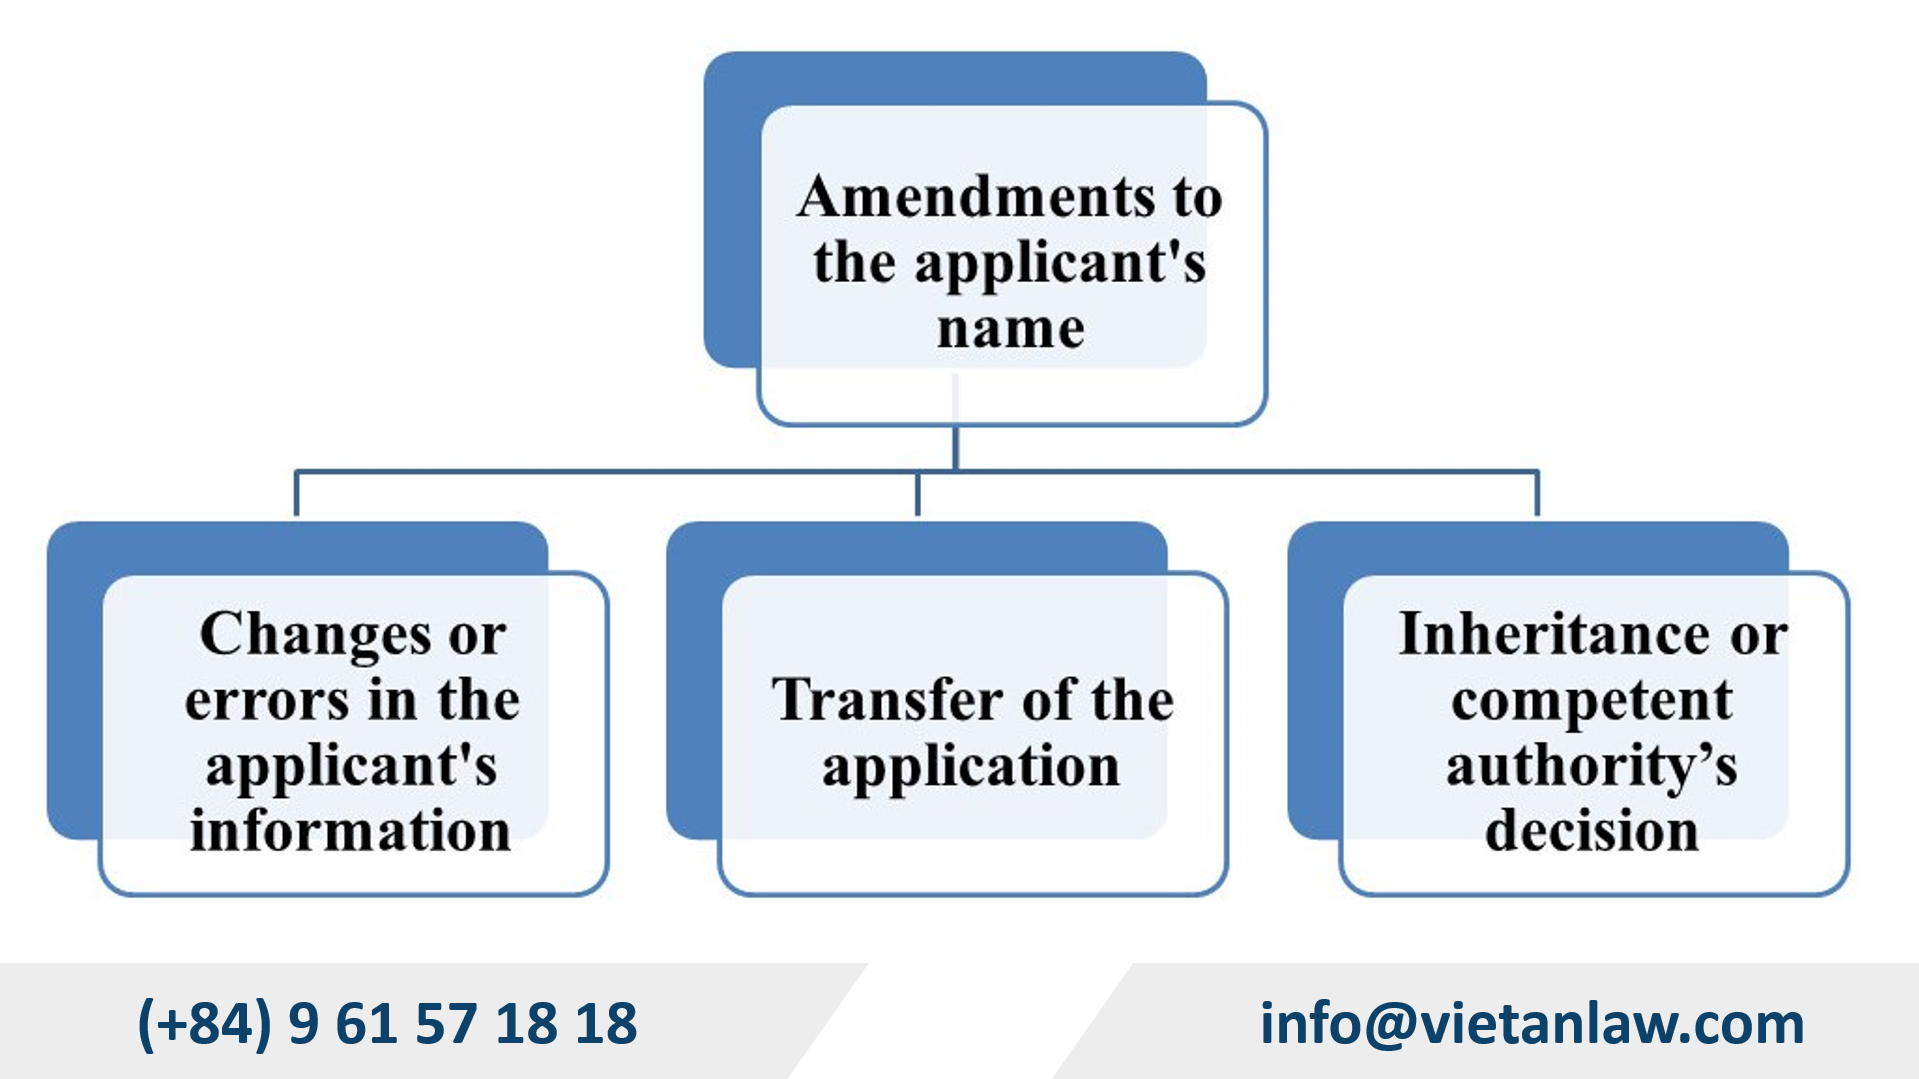 Amend the applicant's industrial property registration in Vietnam